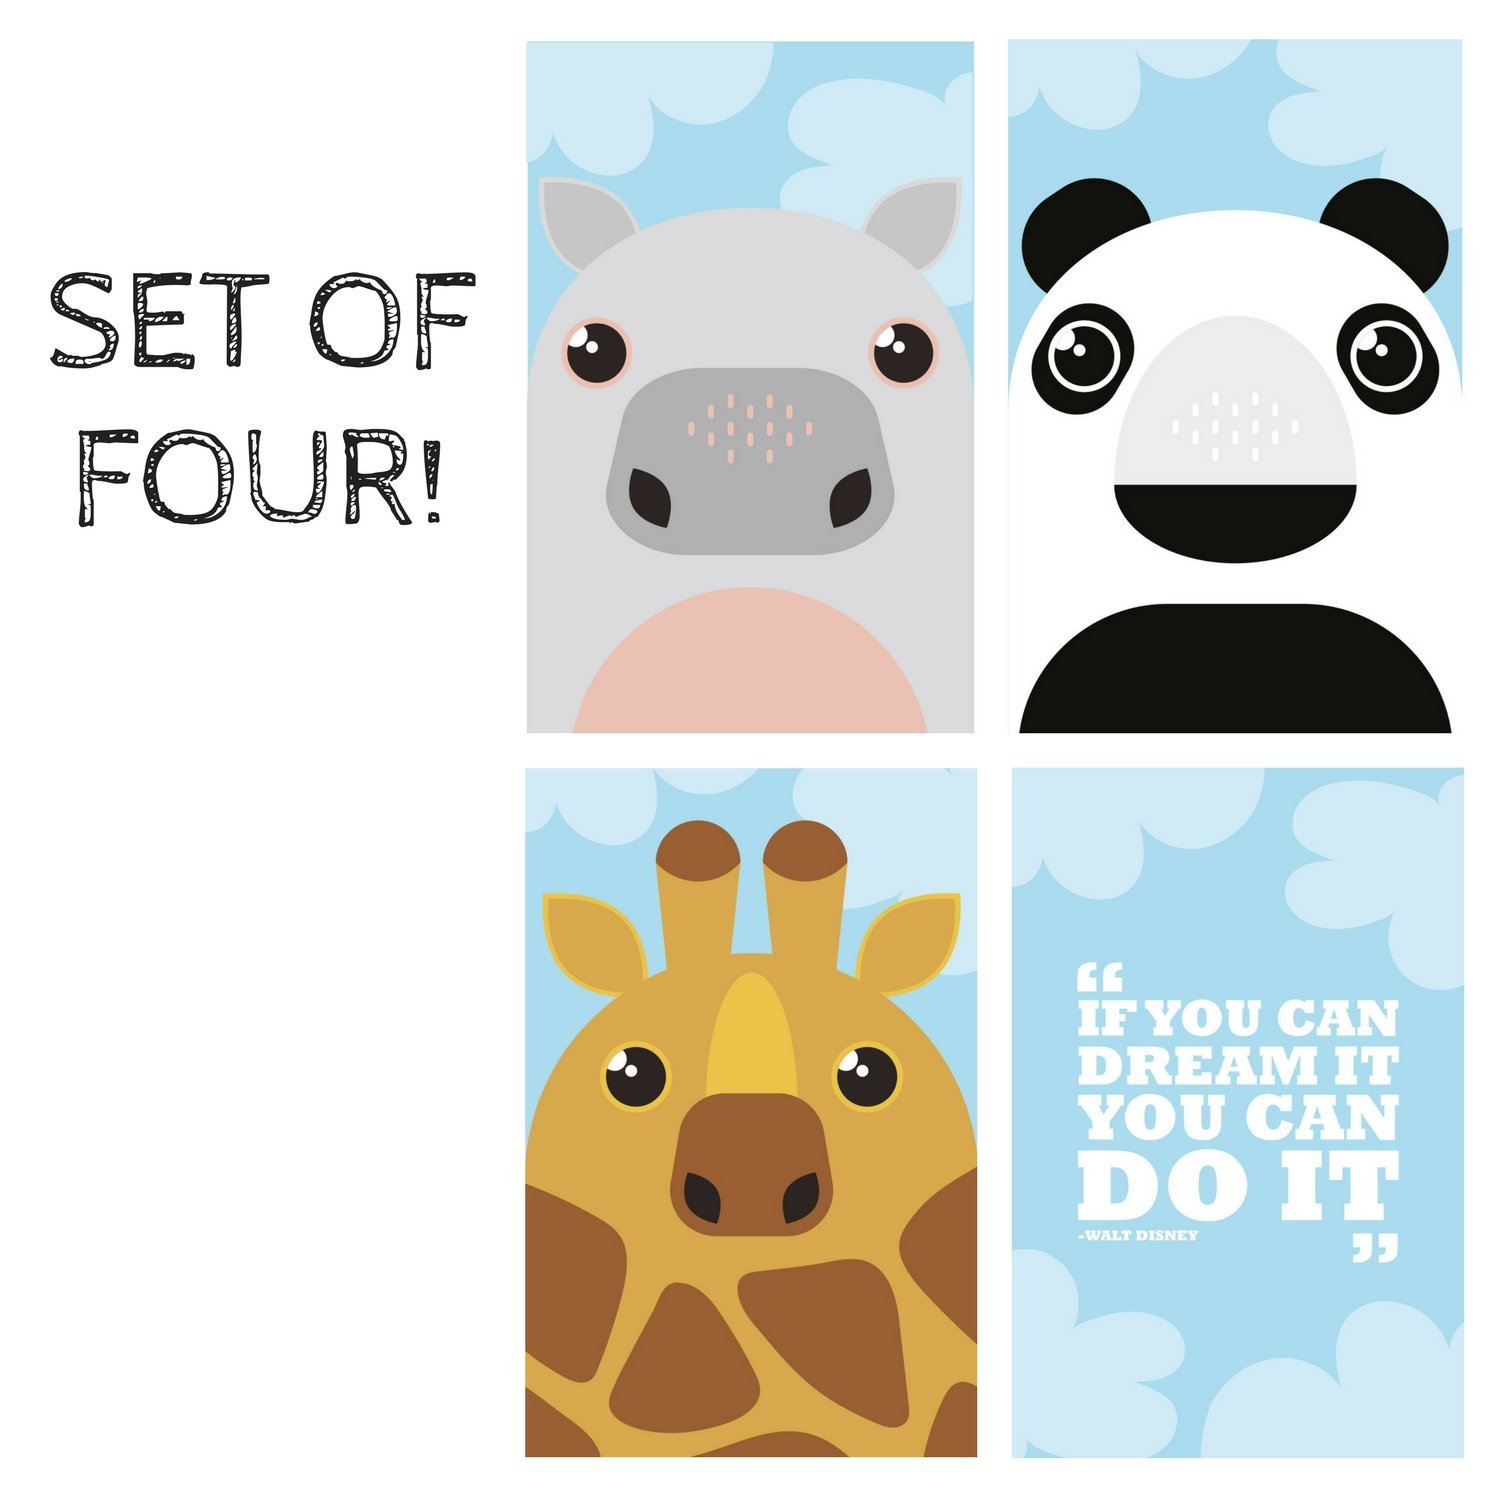 KIDS POSTERS for BEDROOM DECOR: Animal Prints For Children, Set of FOUR 11X17 Posters, Animals Wall Hangings For Nursery, Wall Decals For Baby Room. By Pillow & Toast.